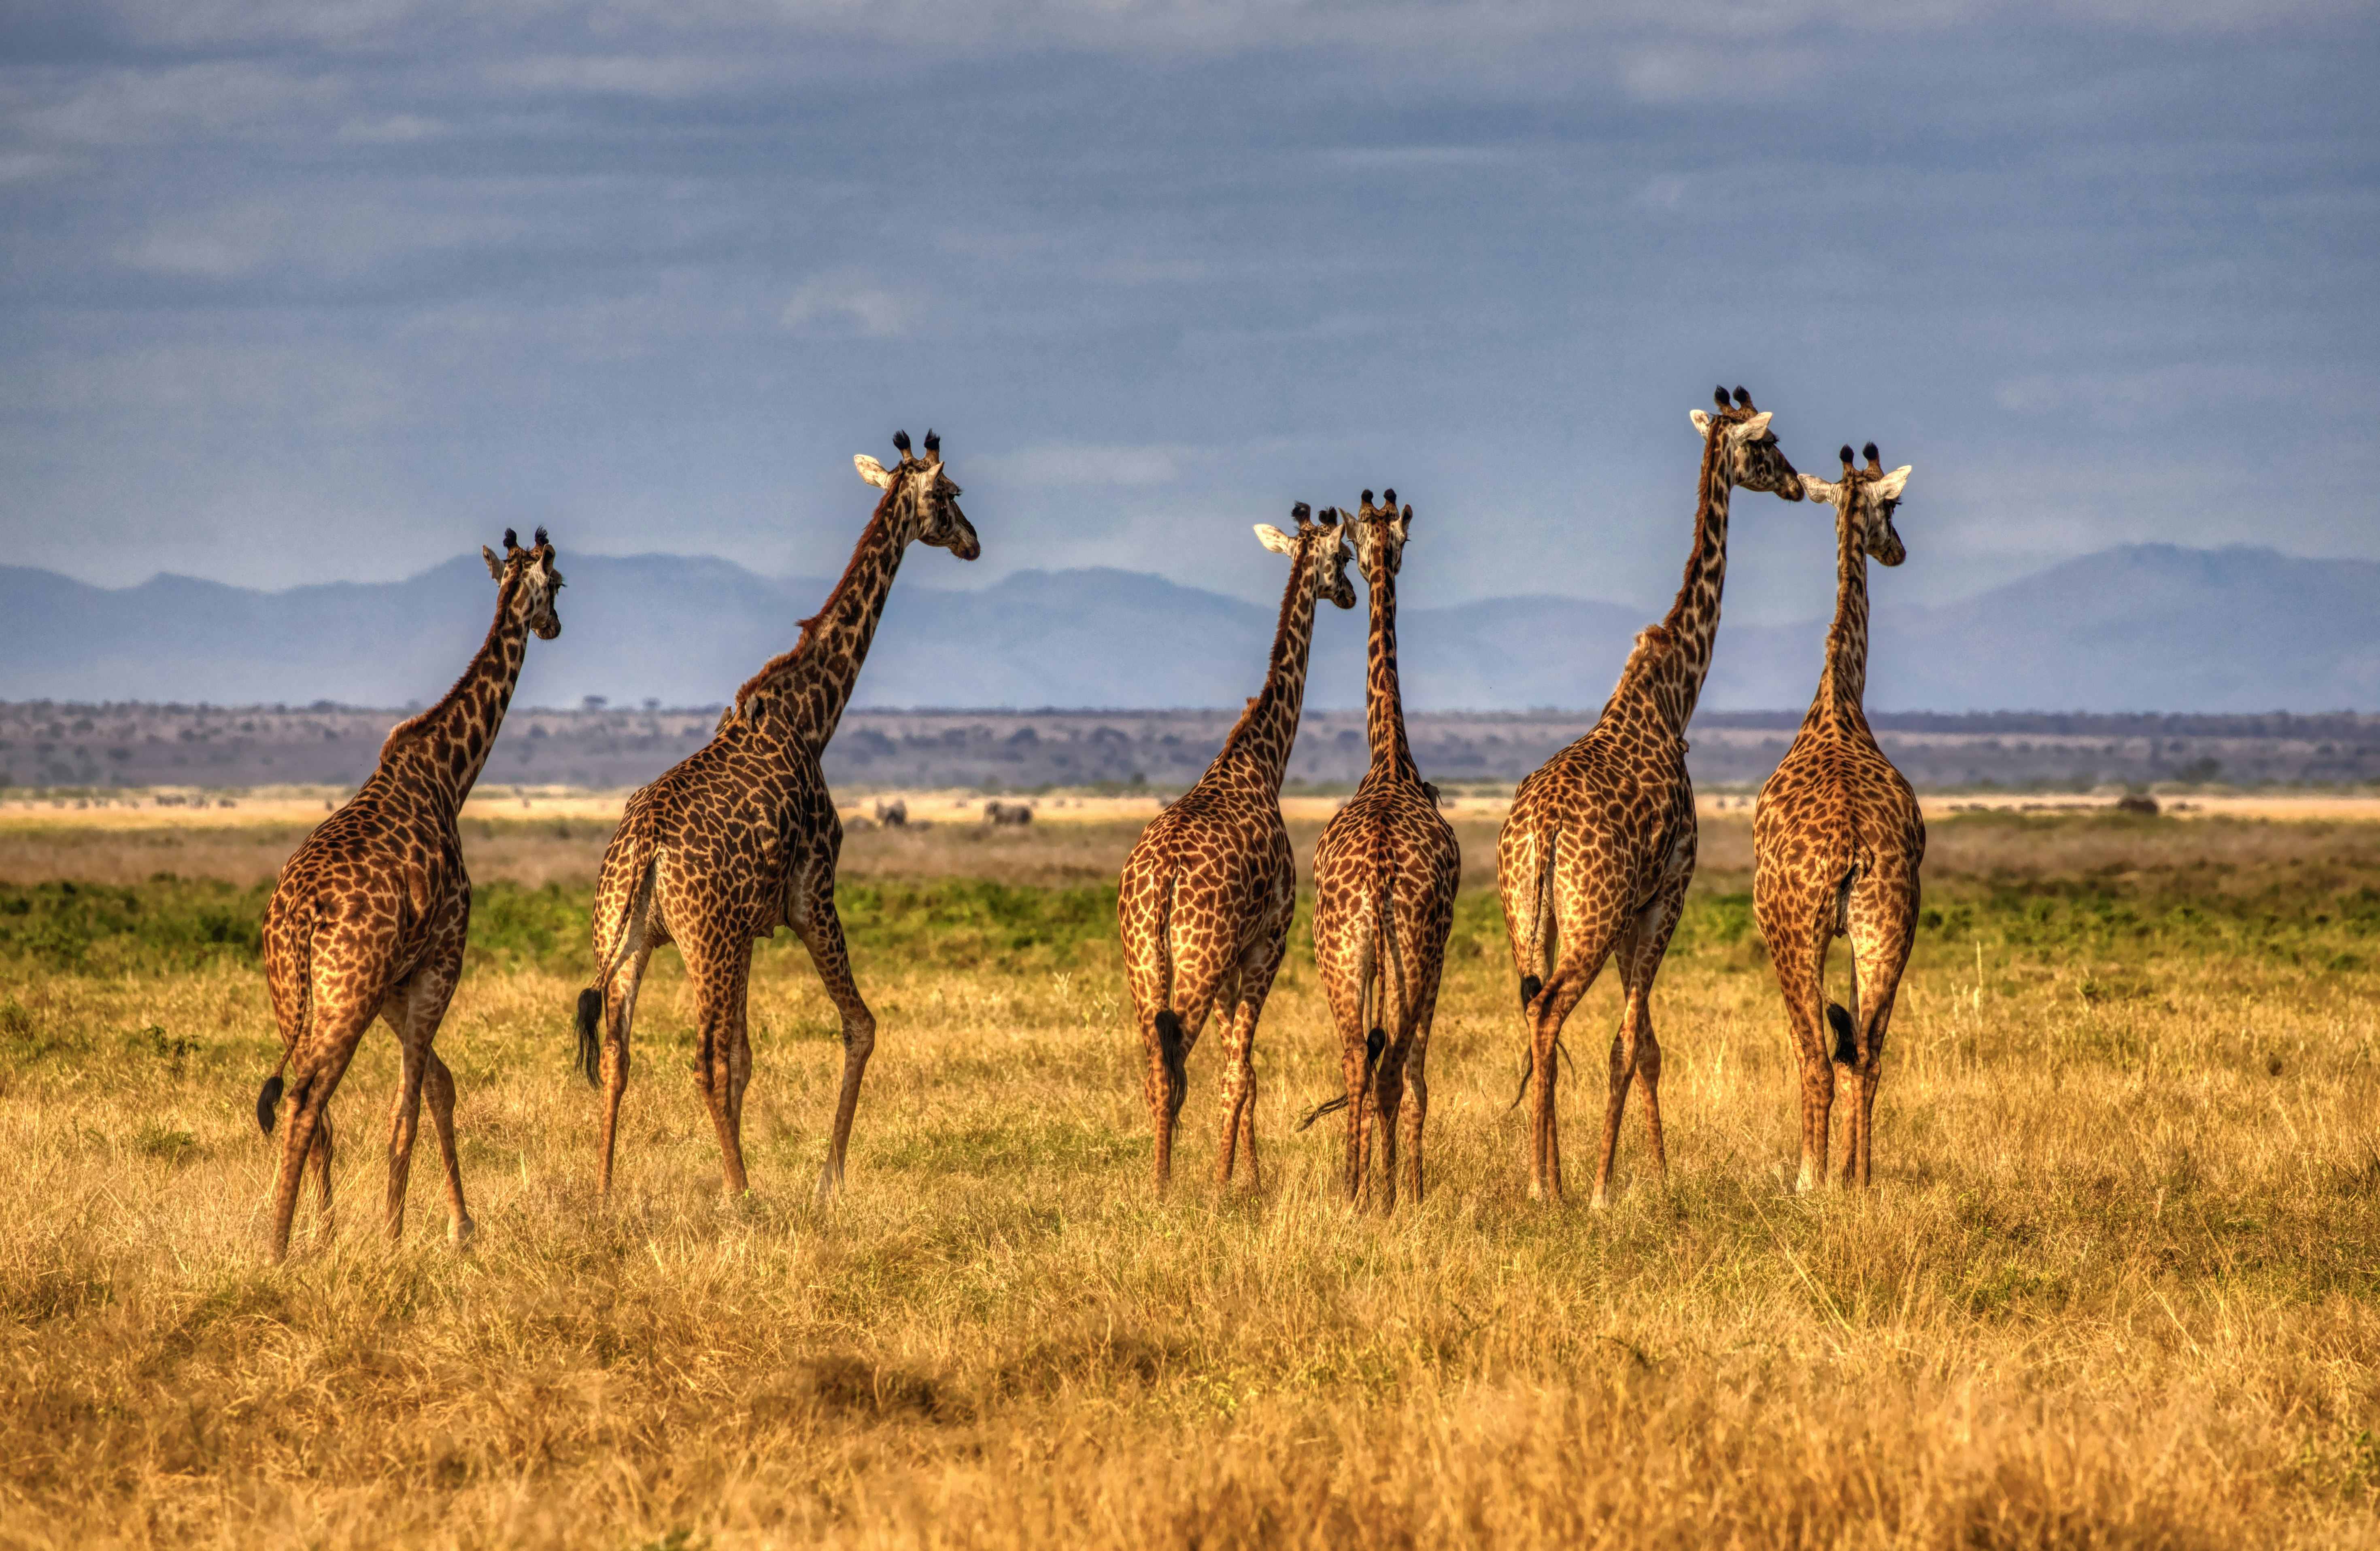 group of giraffes on brown grass field during daytime